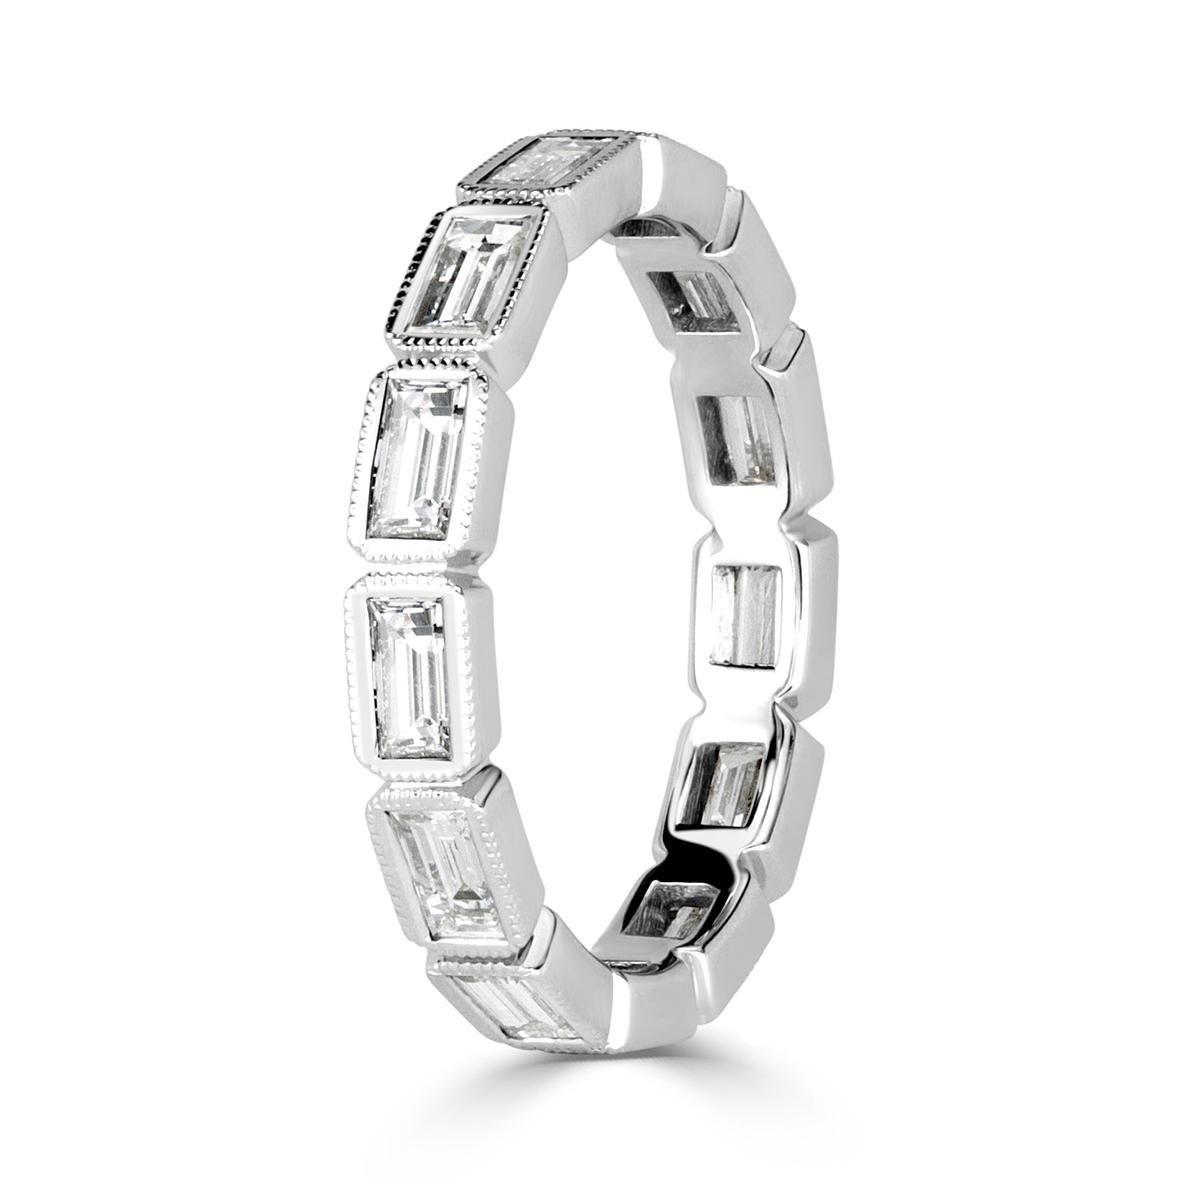 Custom created in 18k white gold, this one of a kind diamond eternity band showcases 1.40ct of impeccably matched baguette cut diamonds graded at E-F in color, VS1-VS2 in clarity. They are each complimented by exquisite milgrain detail throughout.